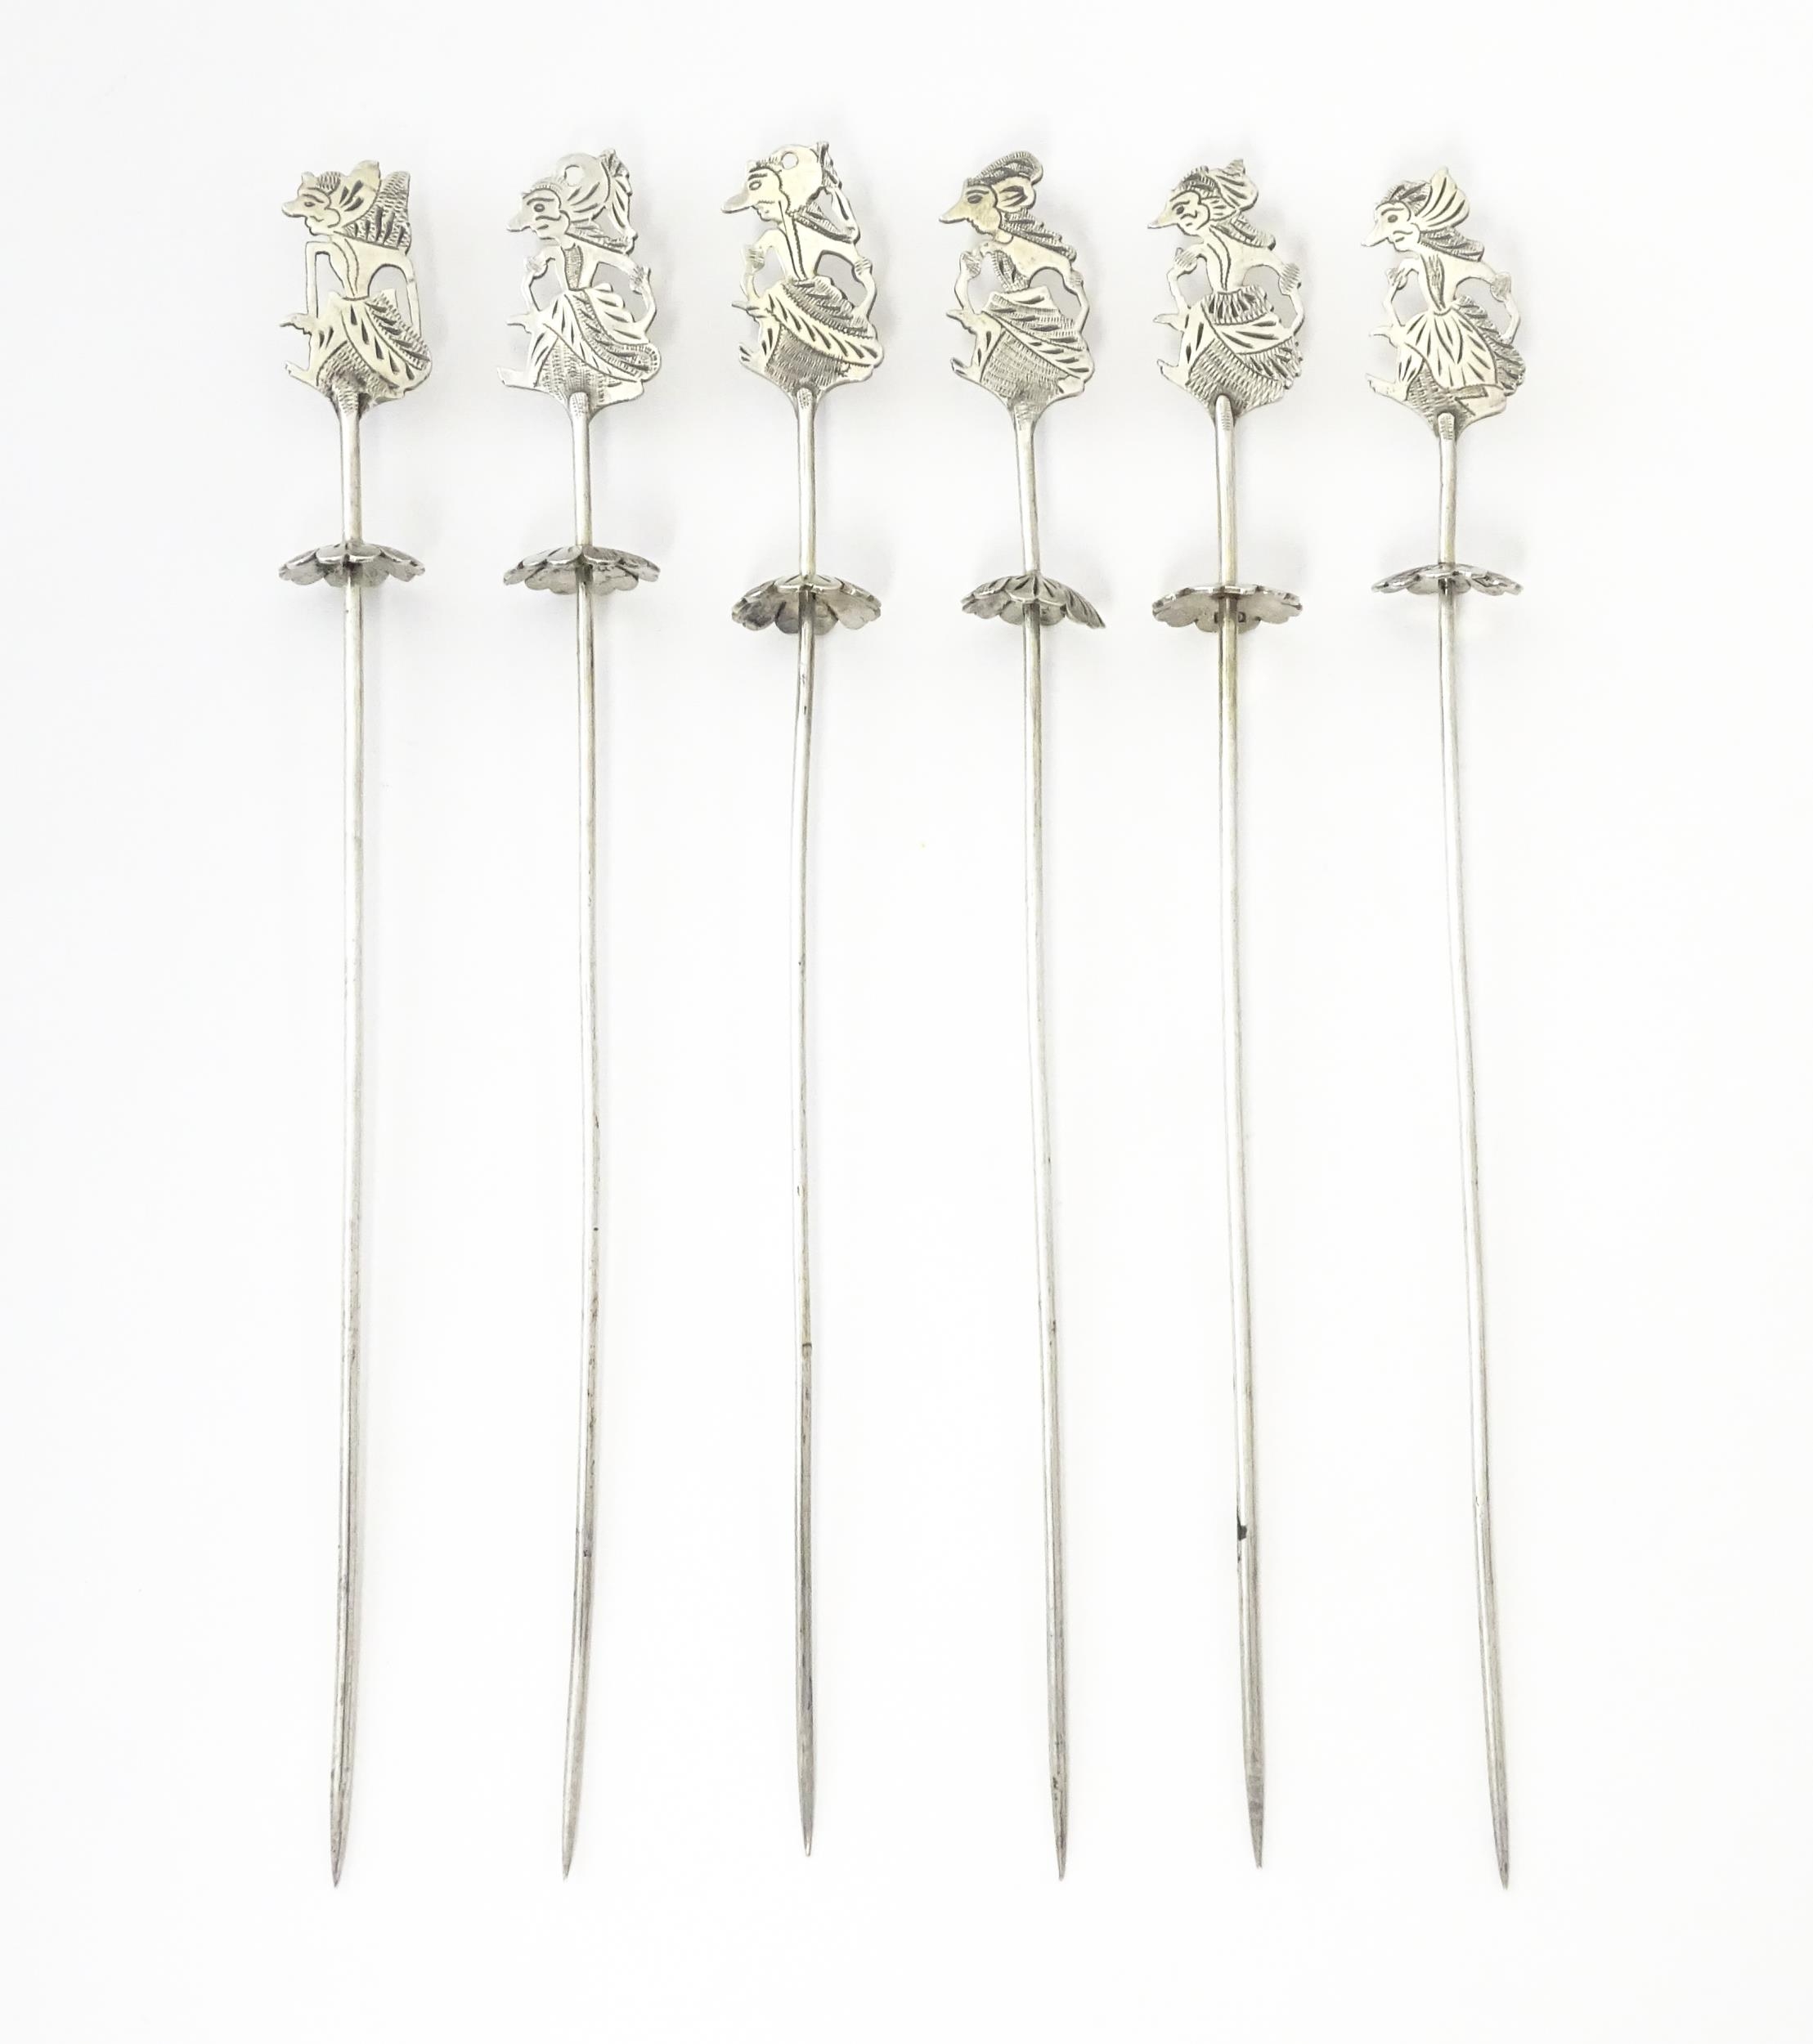 A set of Continental .800 silver skewers / long cocktail sticks with figural finials. Approx 7" long